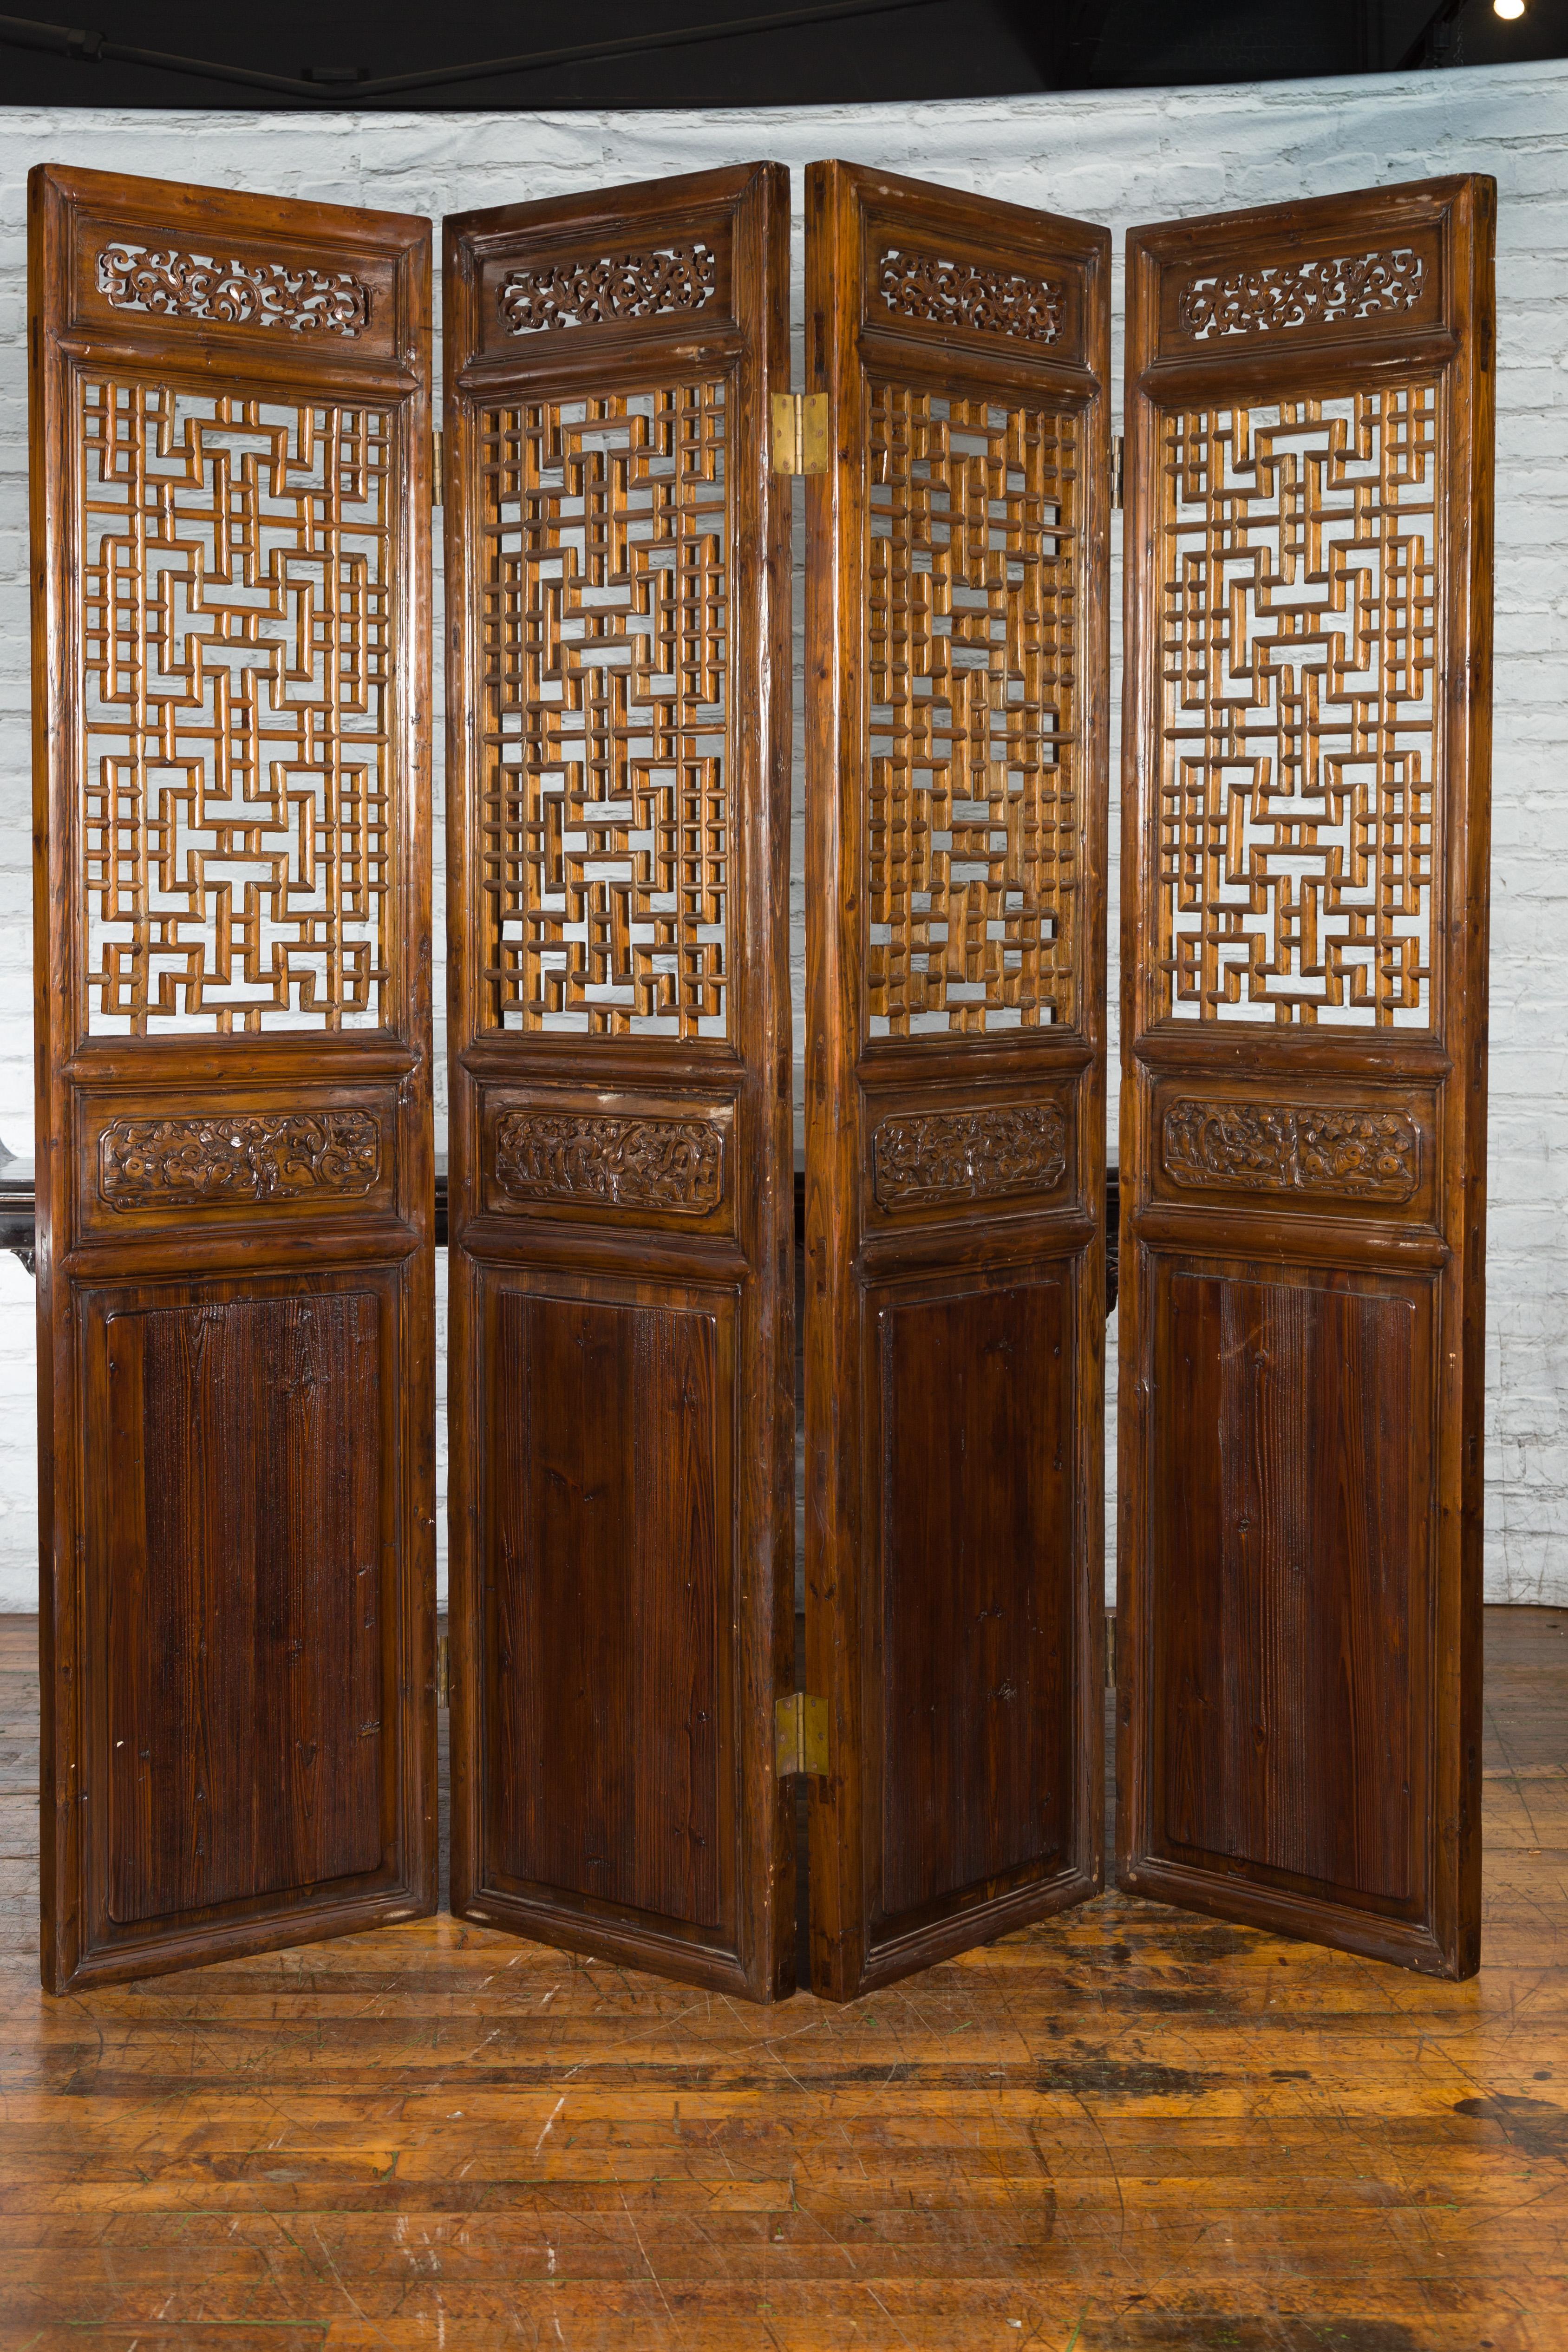 A set of four Chinese Qing Dynasty period large carved elm wood interior door panels from the late 19th century, with fretwork design, openwork and figures in landscape scenes carved in low relief. Created in China during the Qing Dynasty in the